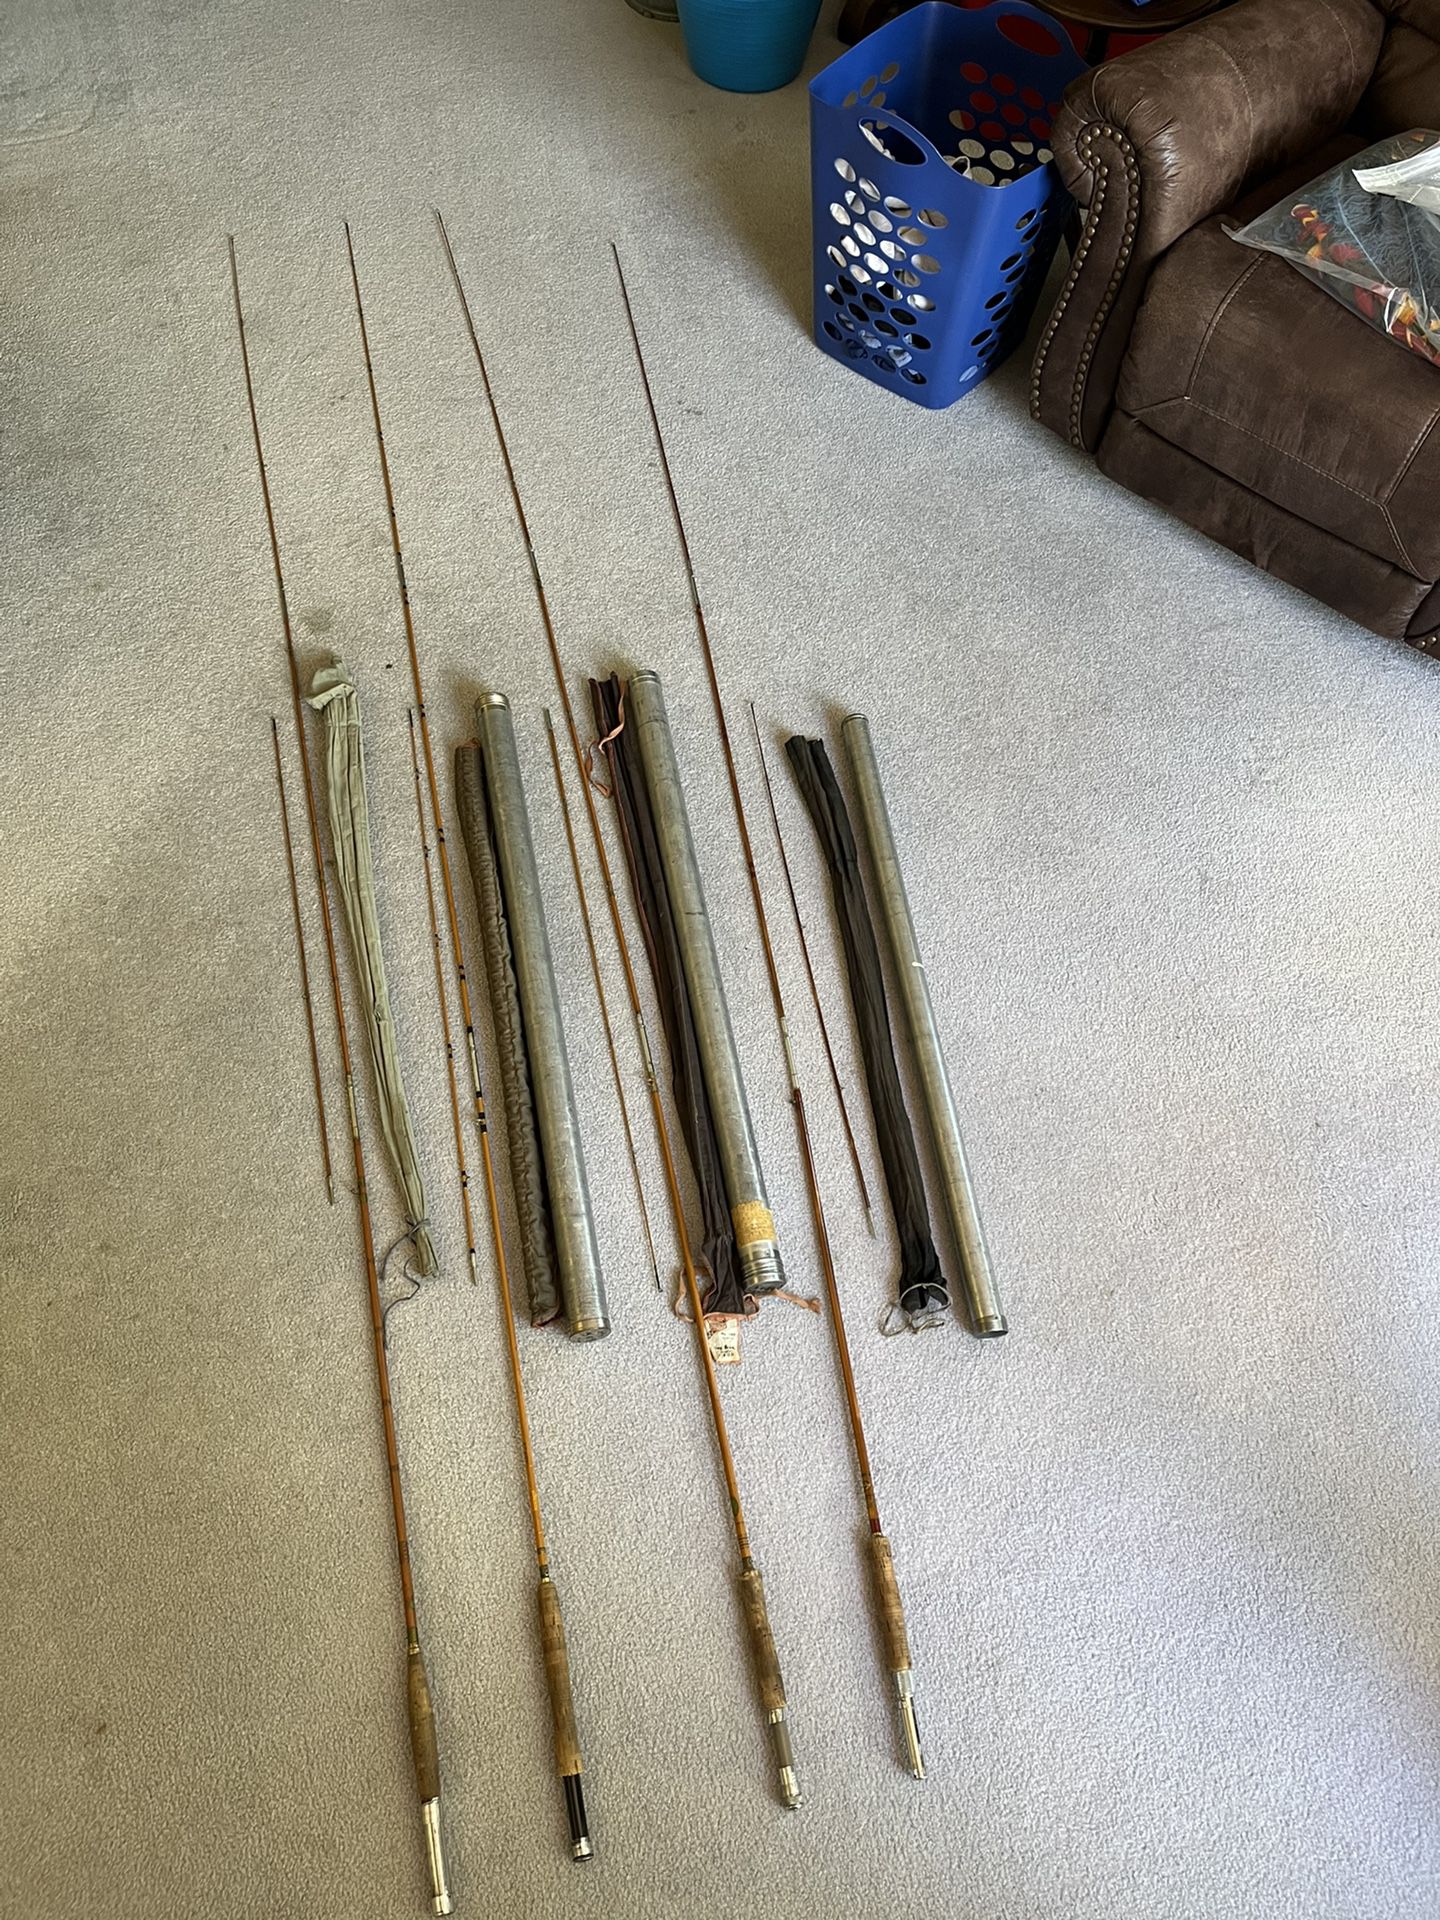 4- Vintage Fly Rods, 9’ Wooden